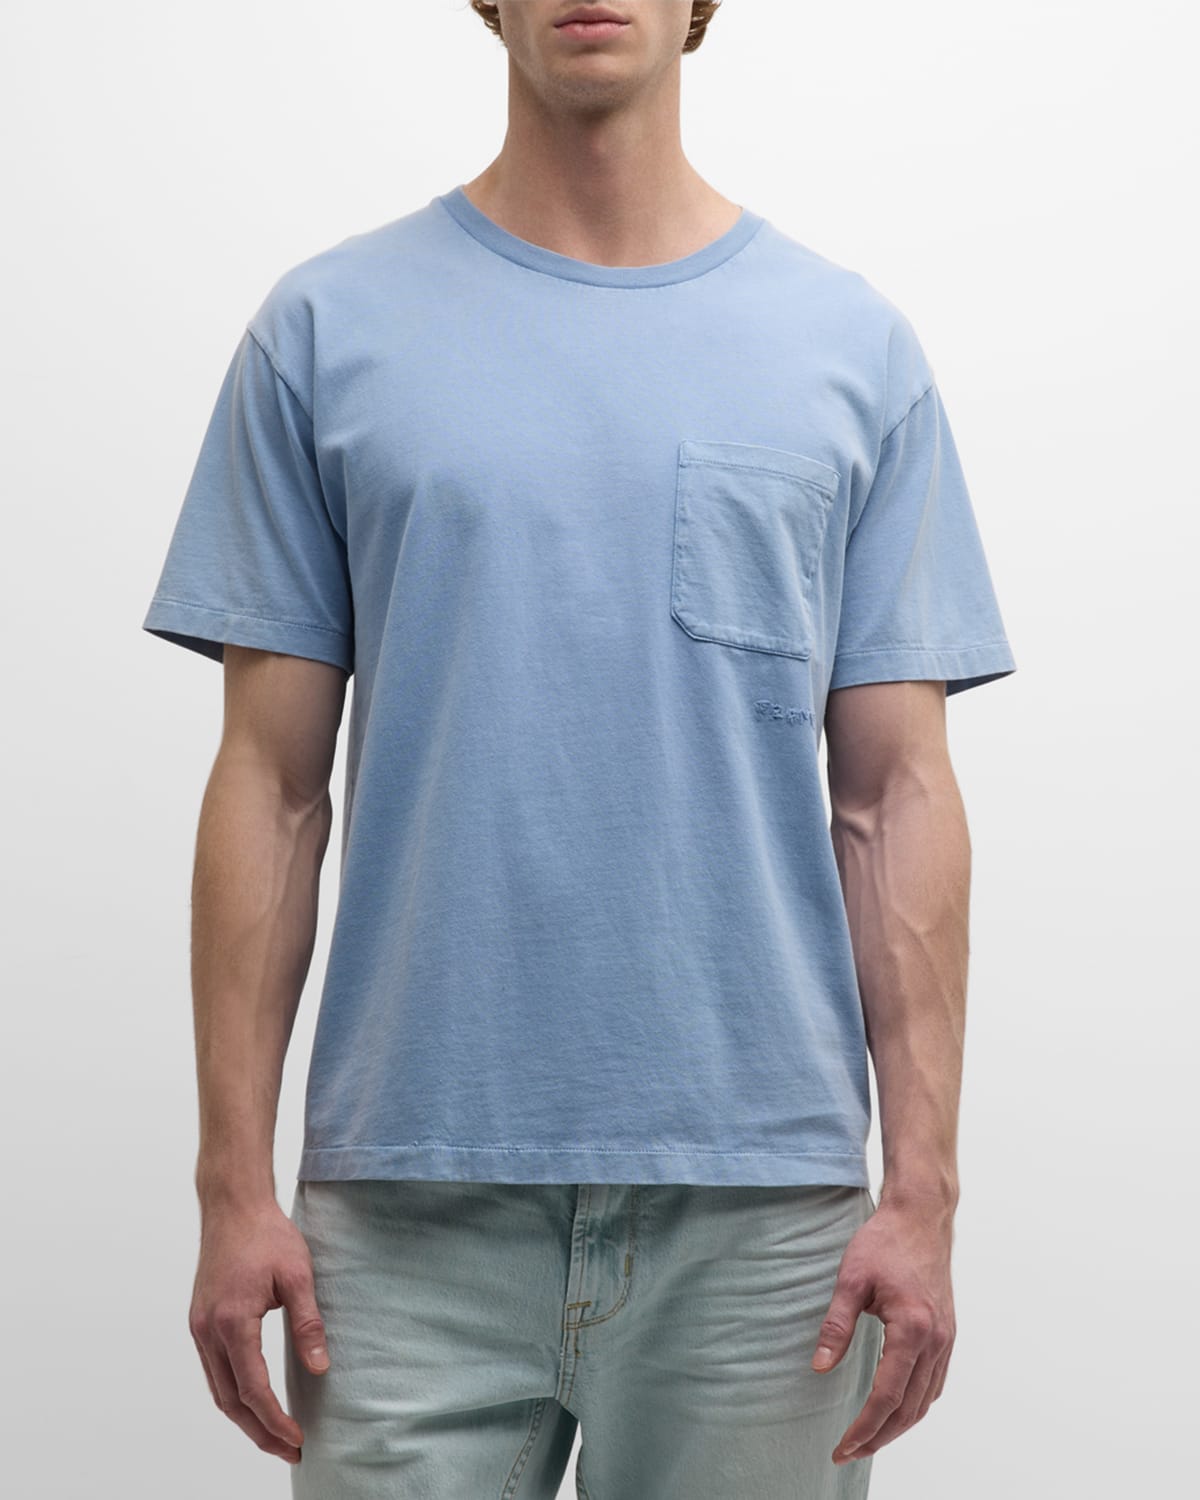 Men's Relaxed Vintage Washed Tee